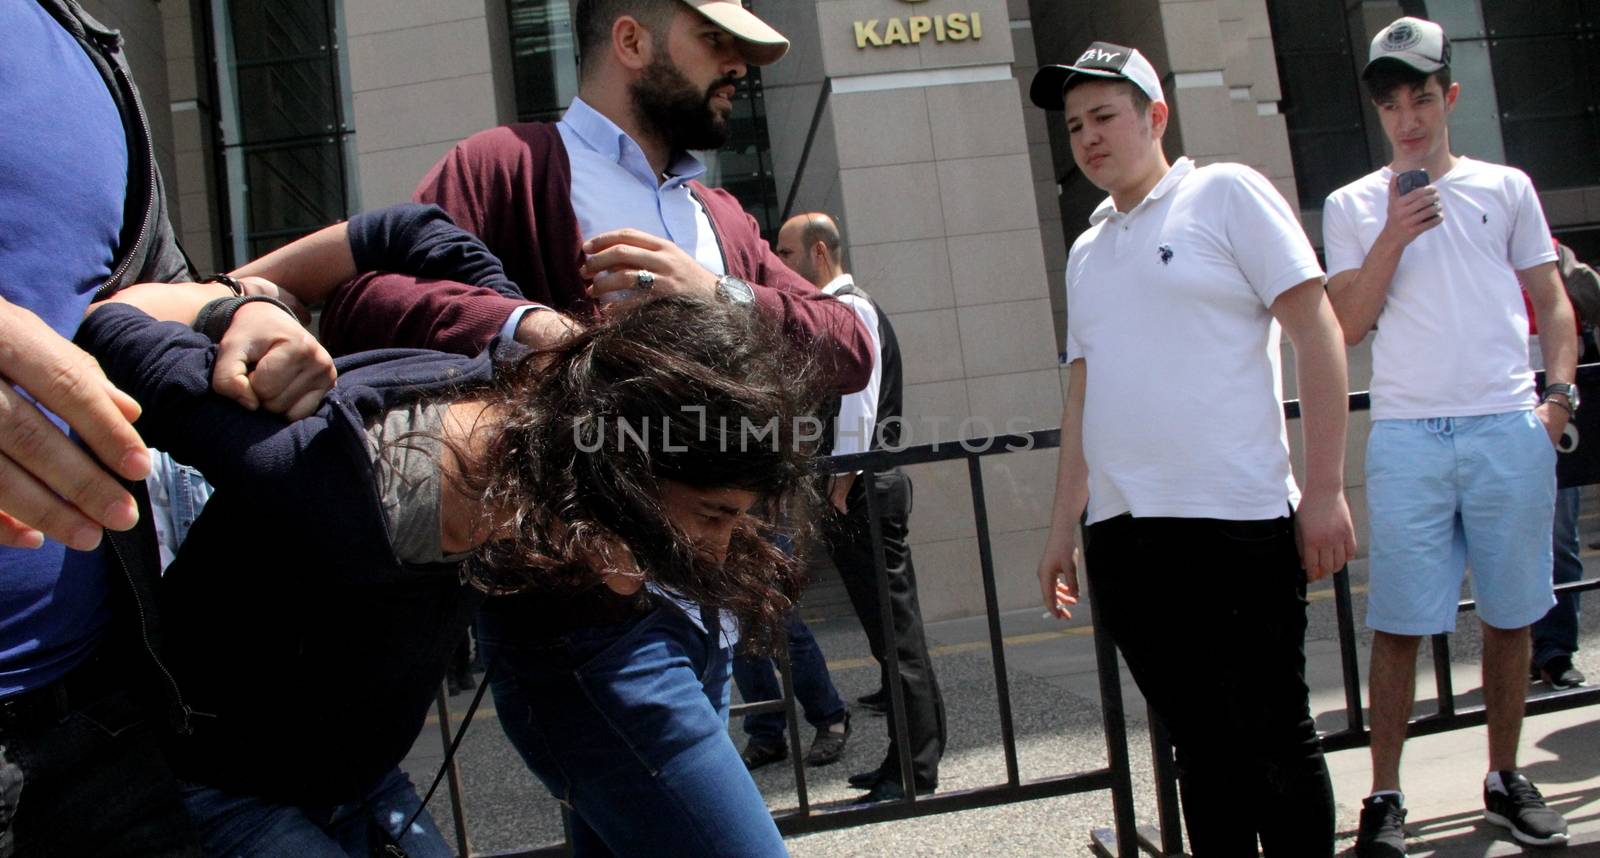 TURKEY, Istanbul: Policemen arrest a protester outside the courthouse in Istanbul, Turkey, on April 20, 2016, during the second hearing in the trial of a police officer accused of killing Dilek Doğan. Dogan died after being shot dead during a police raid of her family's house in Istanbul's Sariyer district, last October. Dozens of protesters, who shouted Murderers of Dilek must be tried, has been taken into custody by police. 